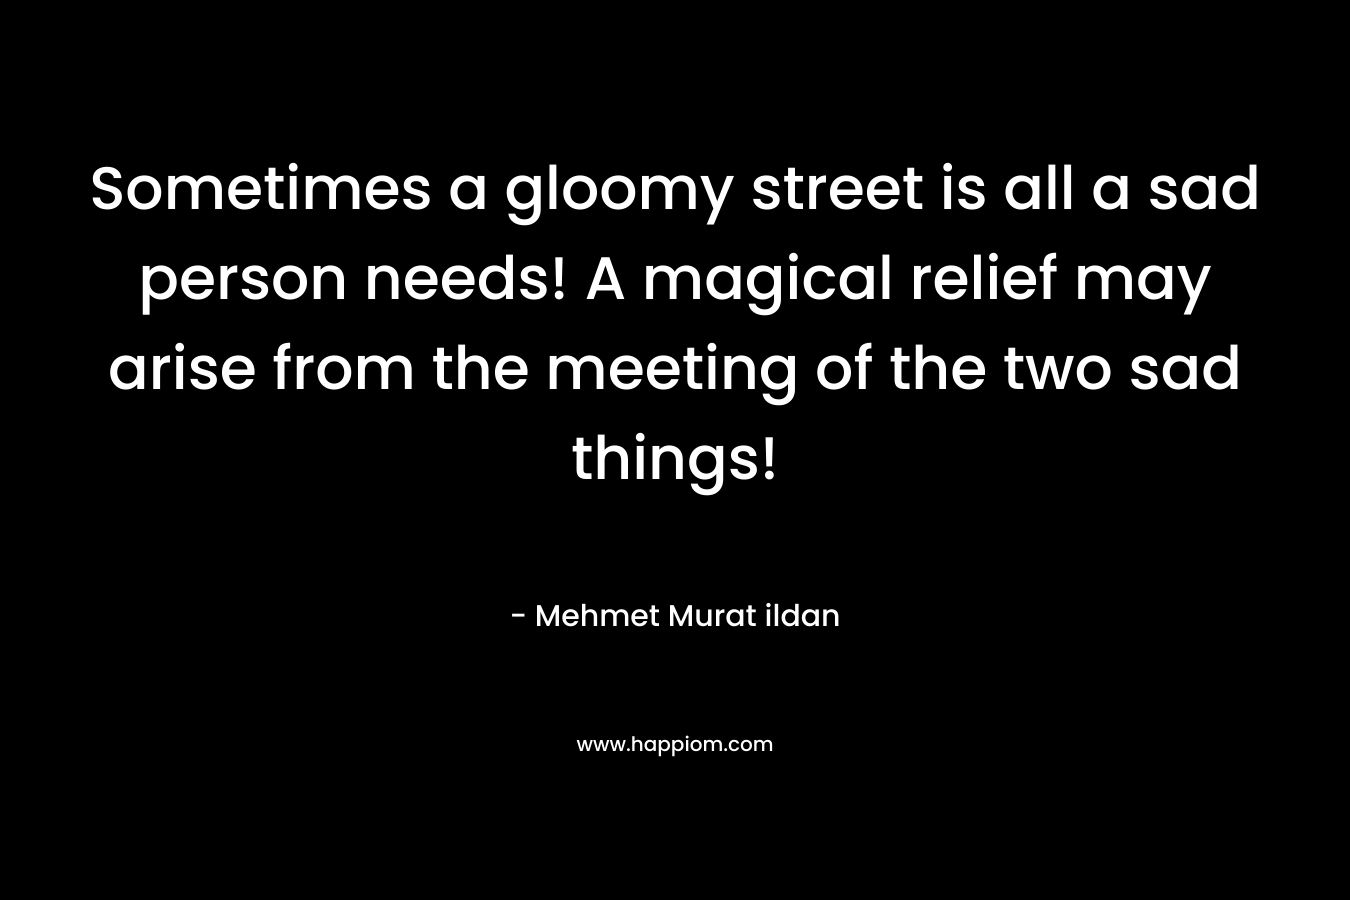 Sometimes a gloomy street is all a sad person needs! A magical relief may arise from the meeting of the two sad things!